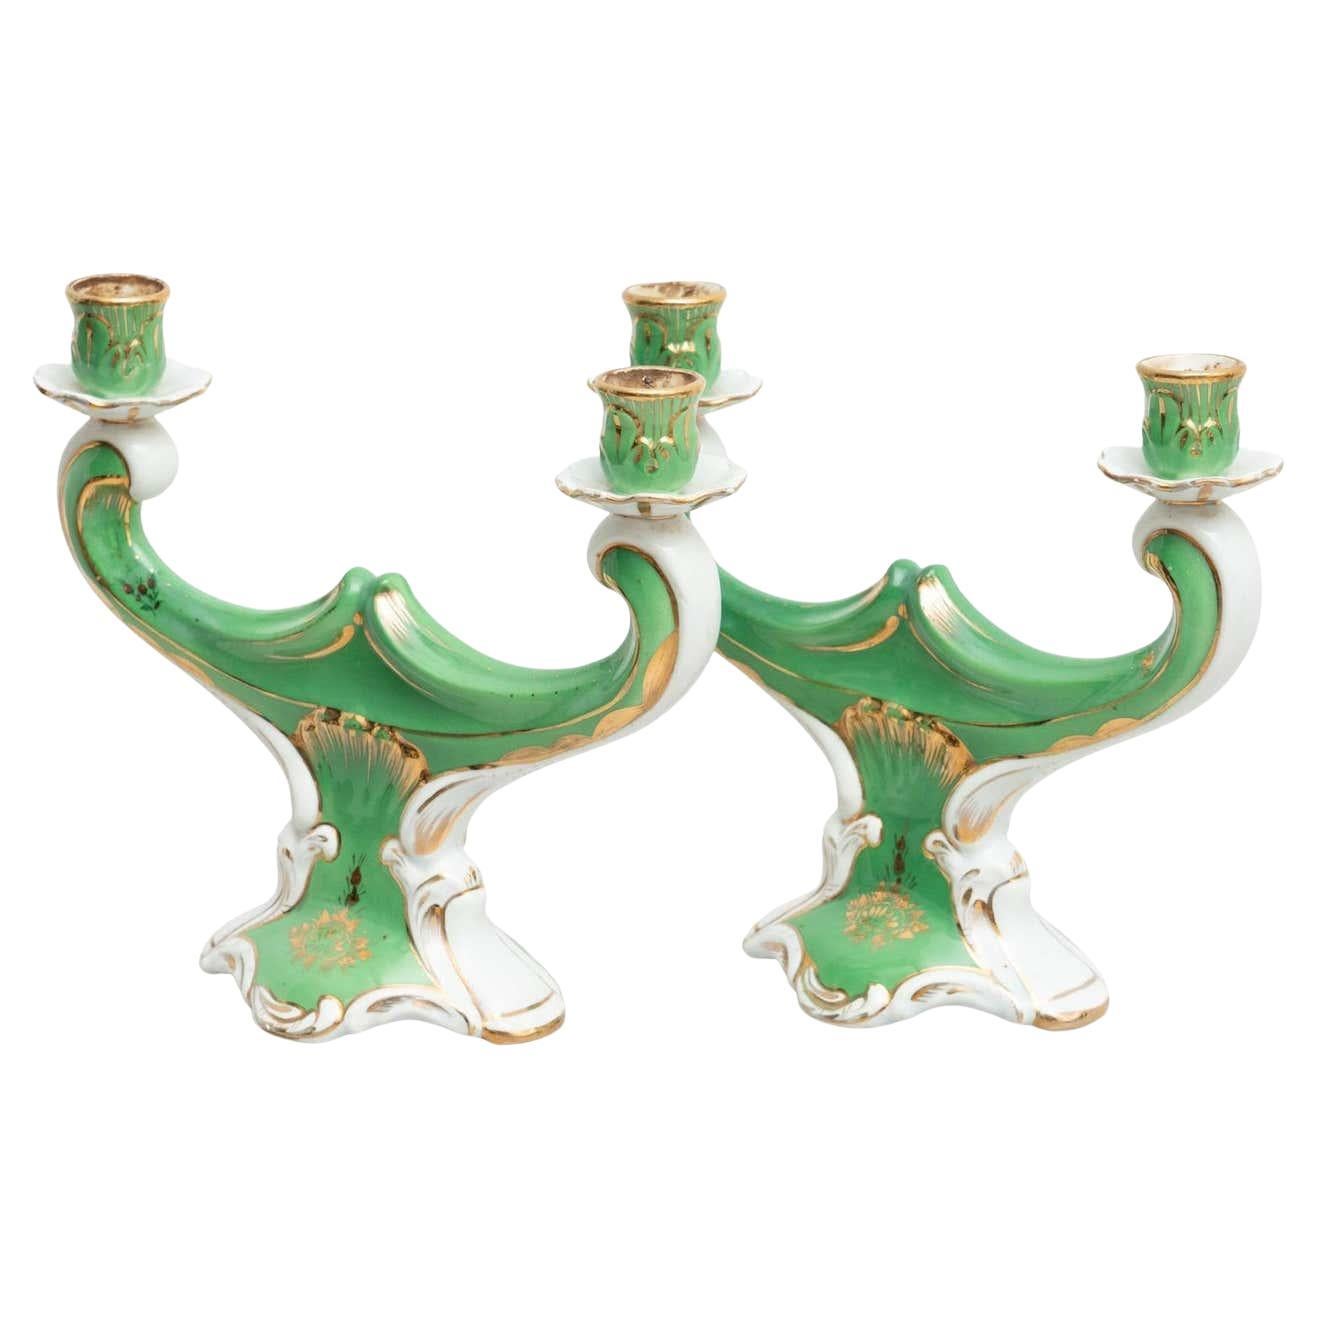 Set of 2 Hand Painted Ceramic Candle Holders, circa 1930 For Sale